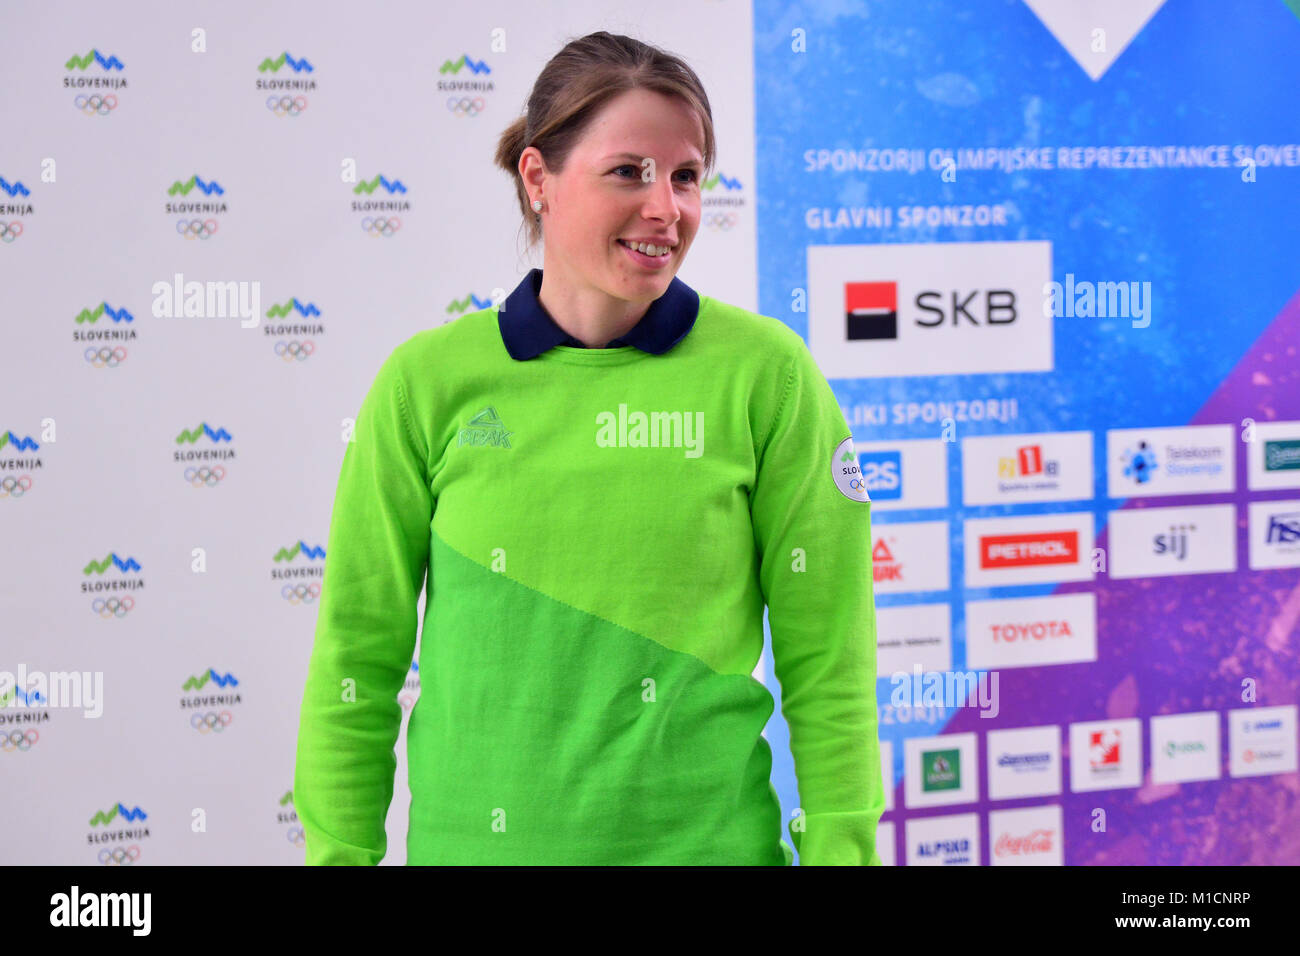 Ljubljana, Slovenia. 29th Jan, 2018. Cross-country skier Vesna Fabjan, who is named Slovenia's flag-bearer for the opening ceremony of the 2018 Pyeongchang Winter Olympic Games at official presentation of the Slovenian Olympic team at Hotel Union. Credit: Matic Štojs/Alamy Live News Stock Photo